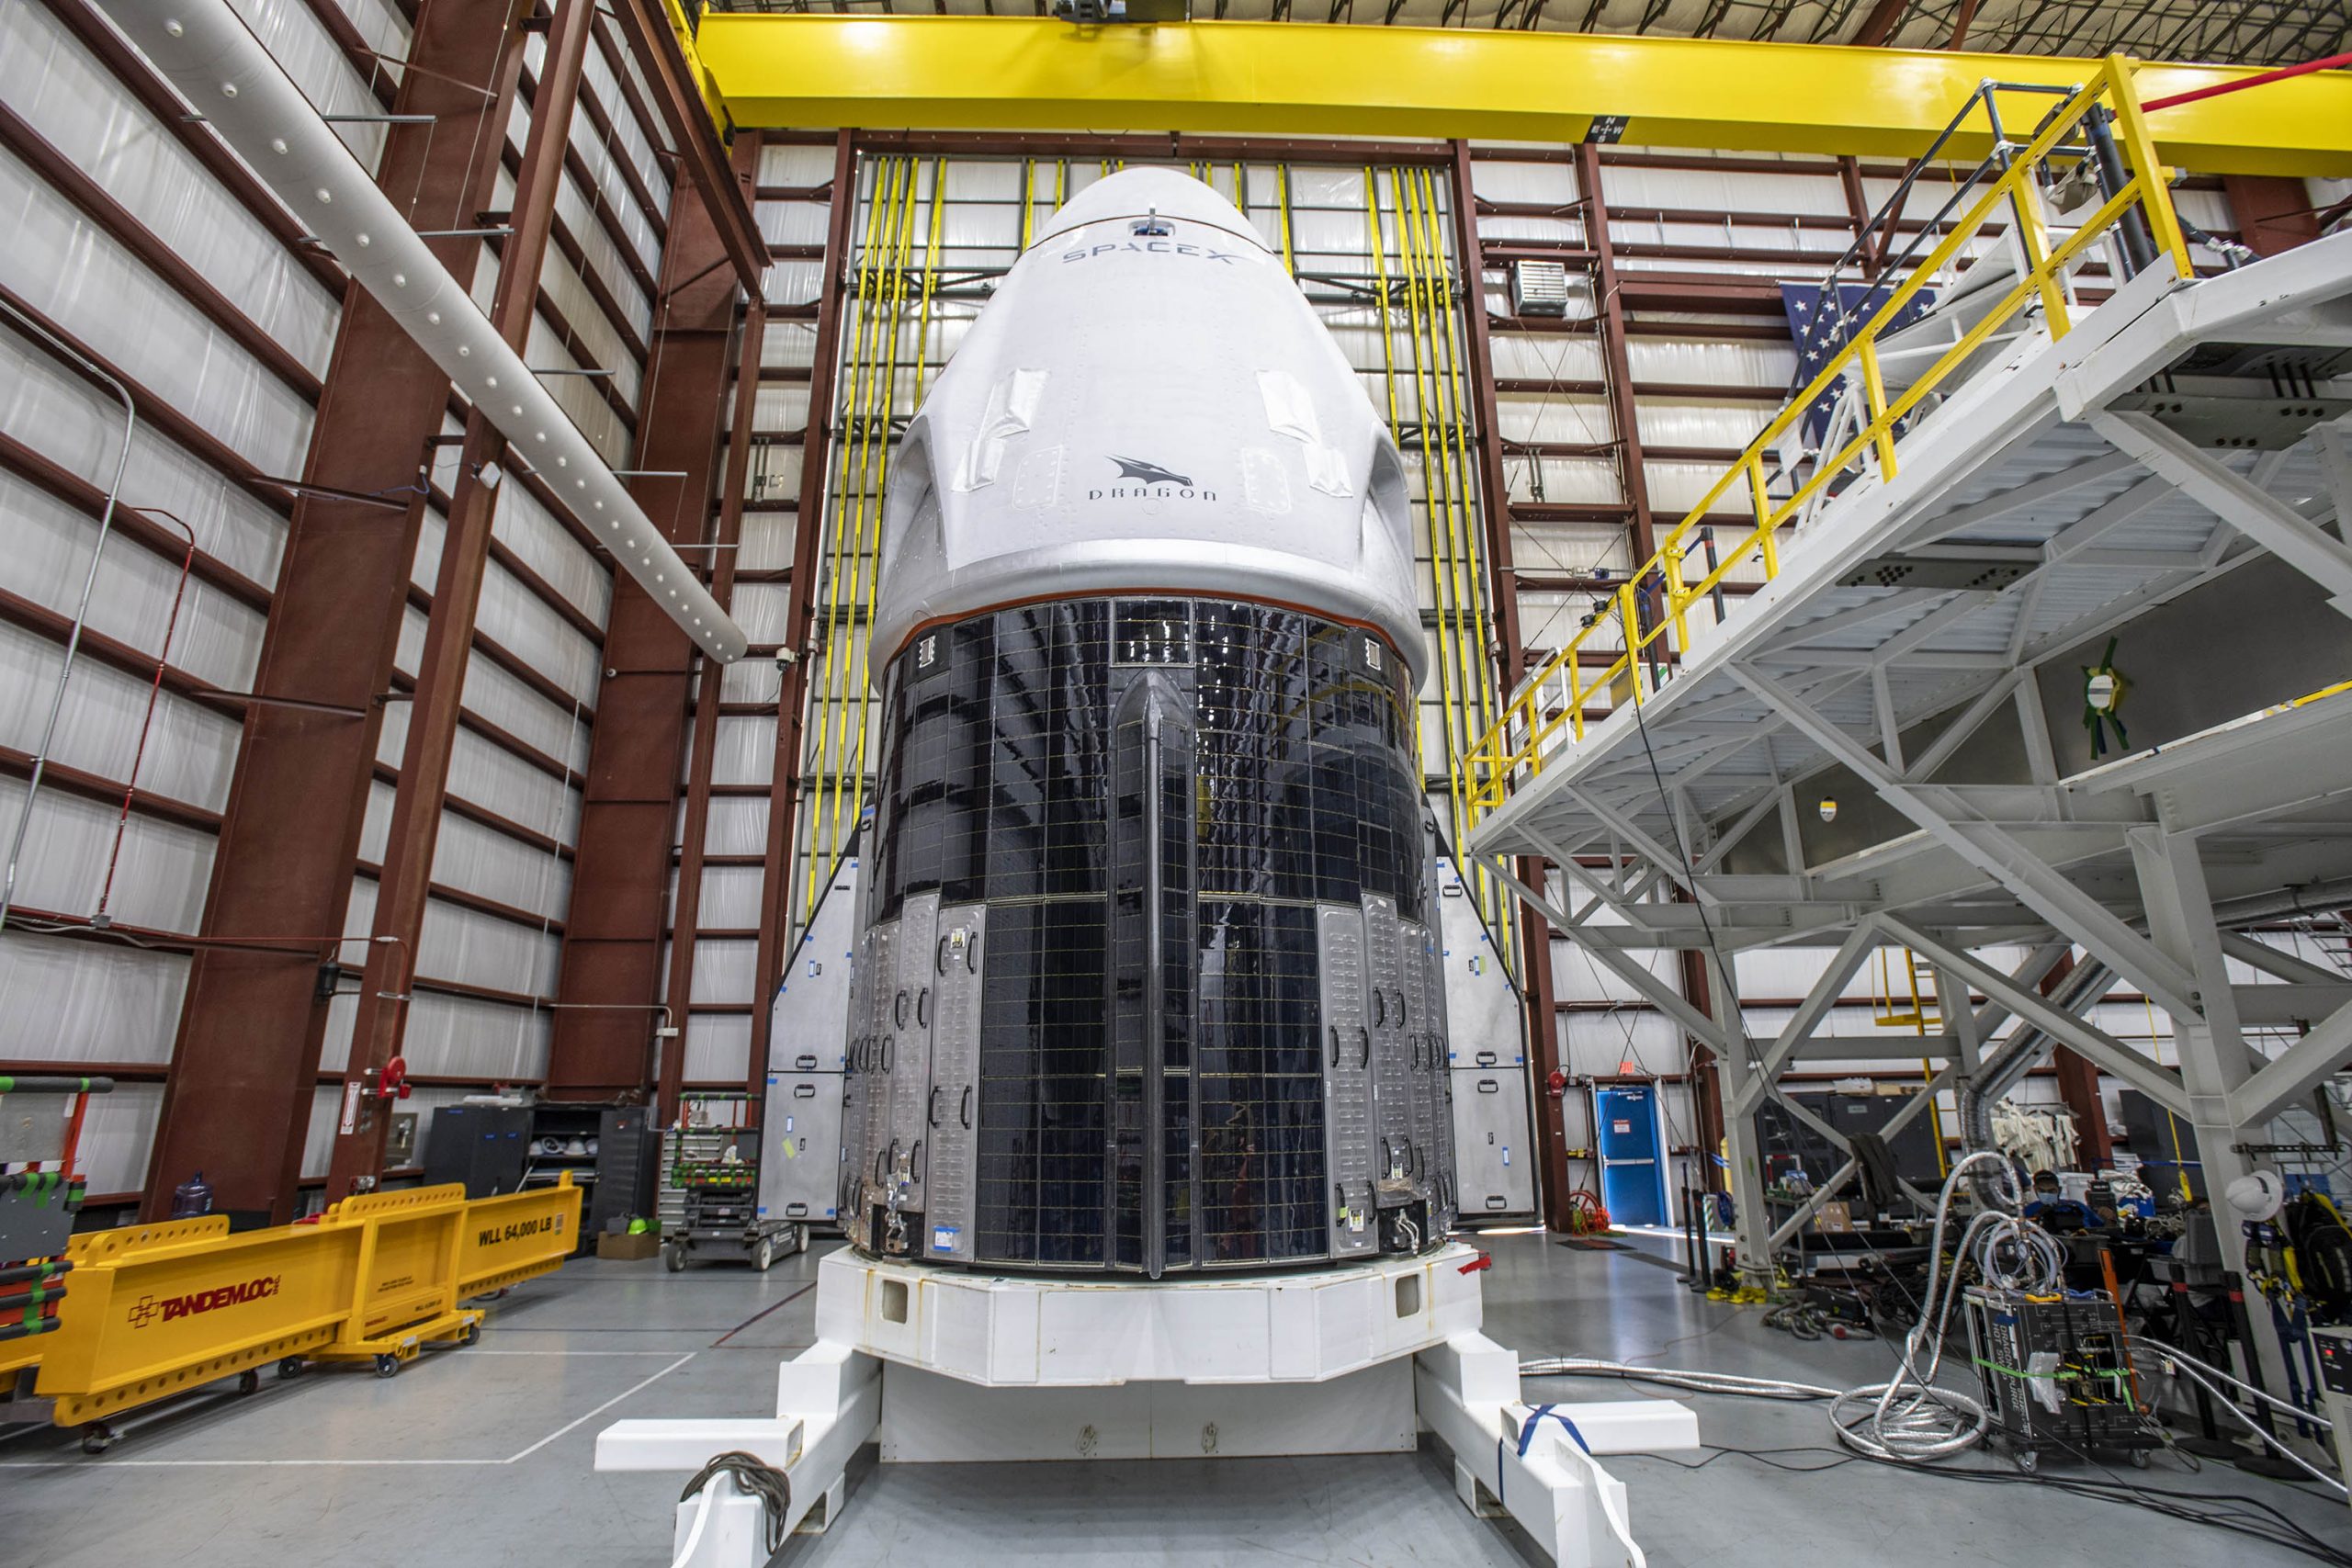 SpaceX's Crew-1 Crew Dragon spacecraft will inaugurate the first operational crew flight for NASA on November 14, 2020.